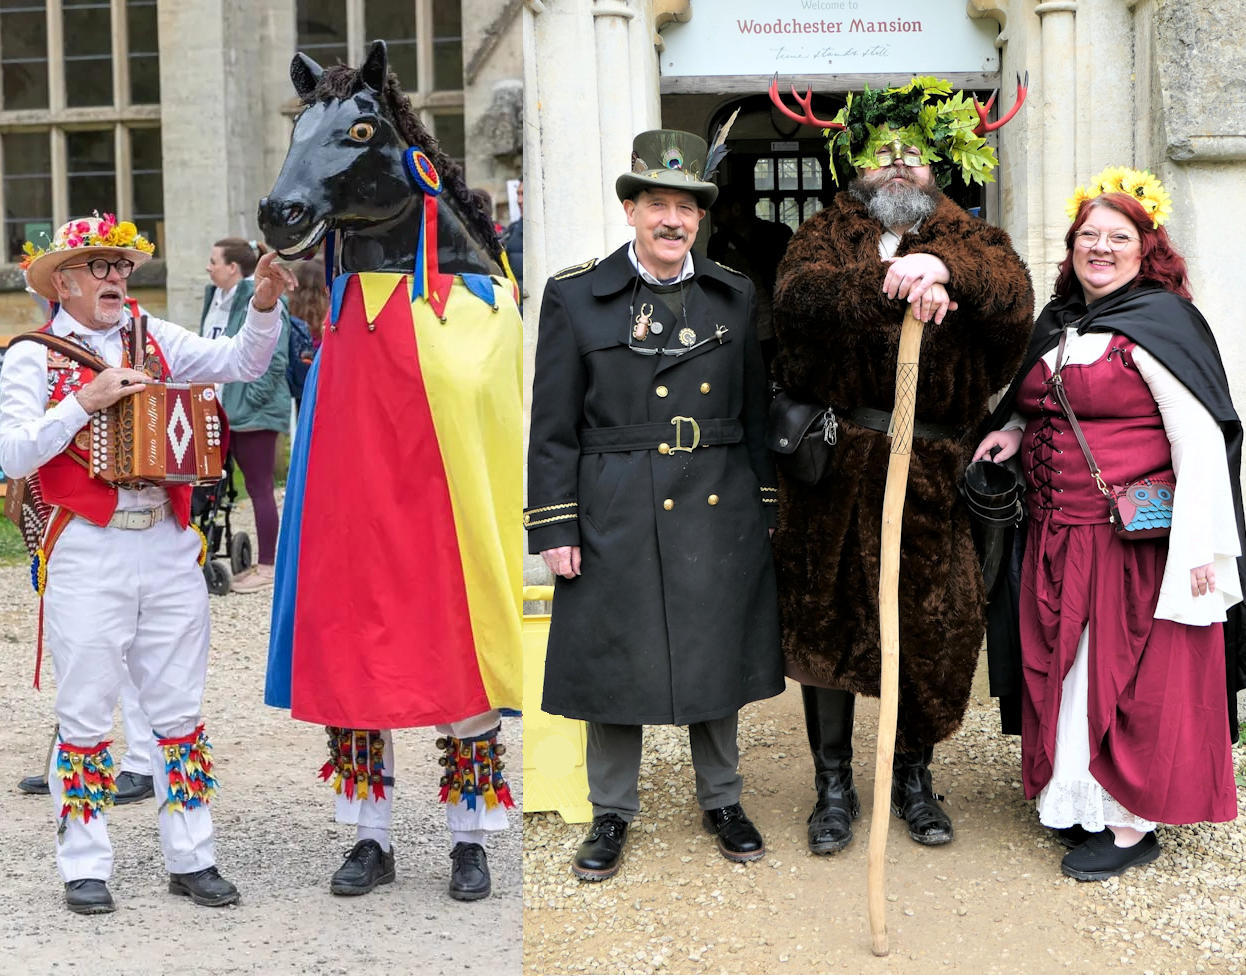 May Fair with the Steampunks at Woodchester Mansion